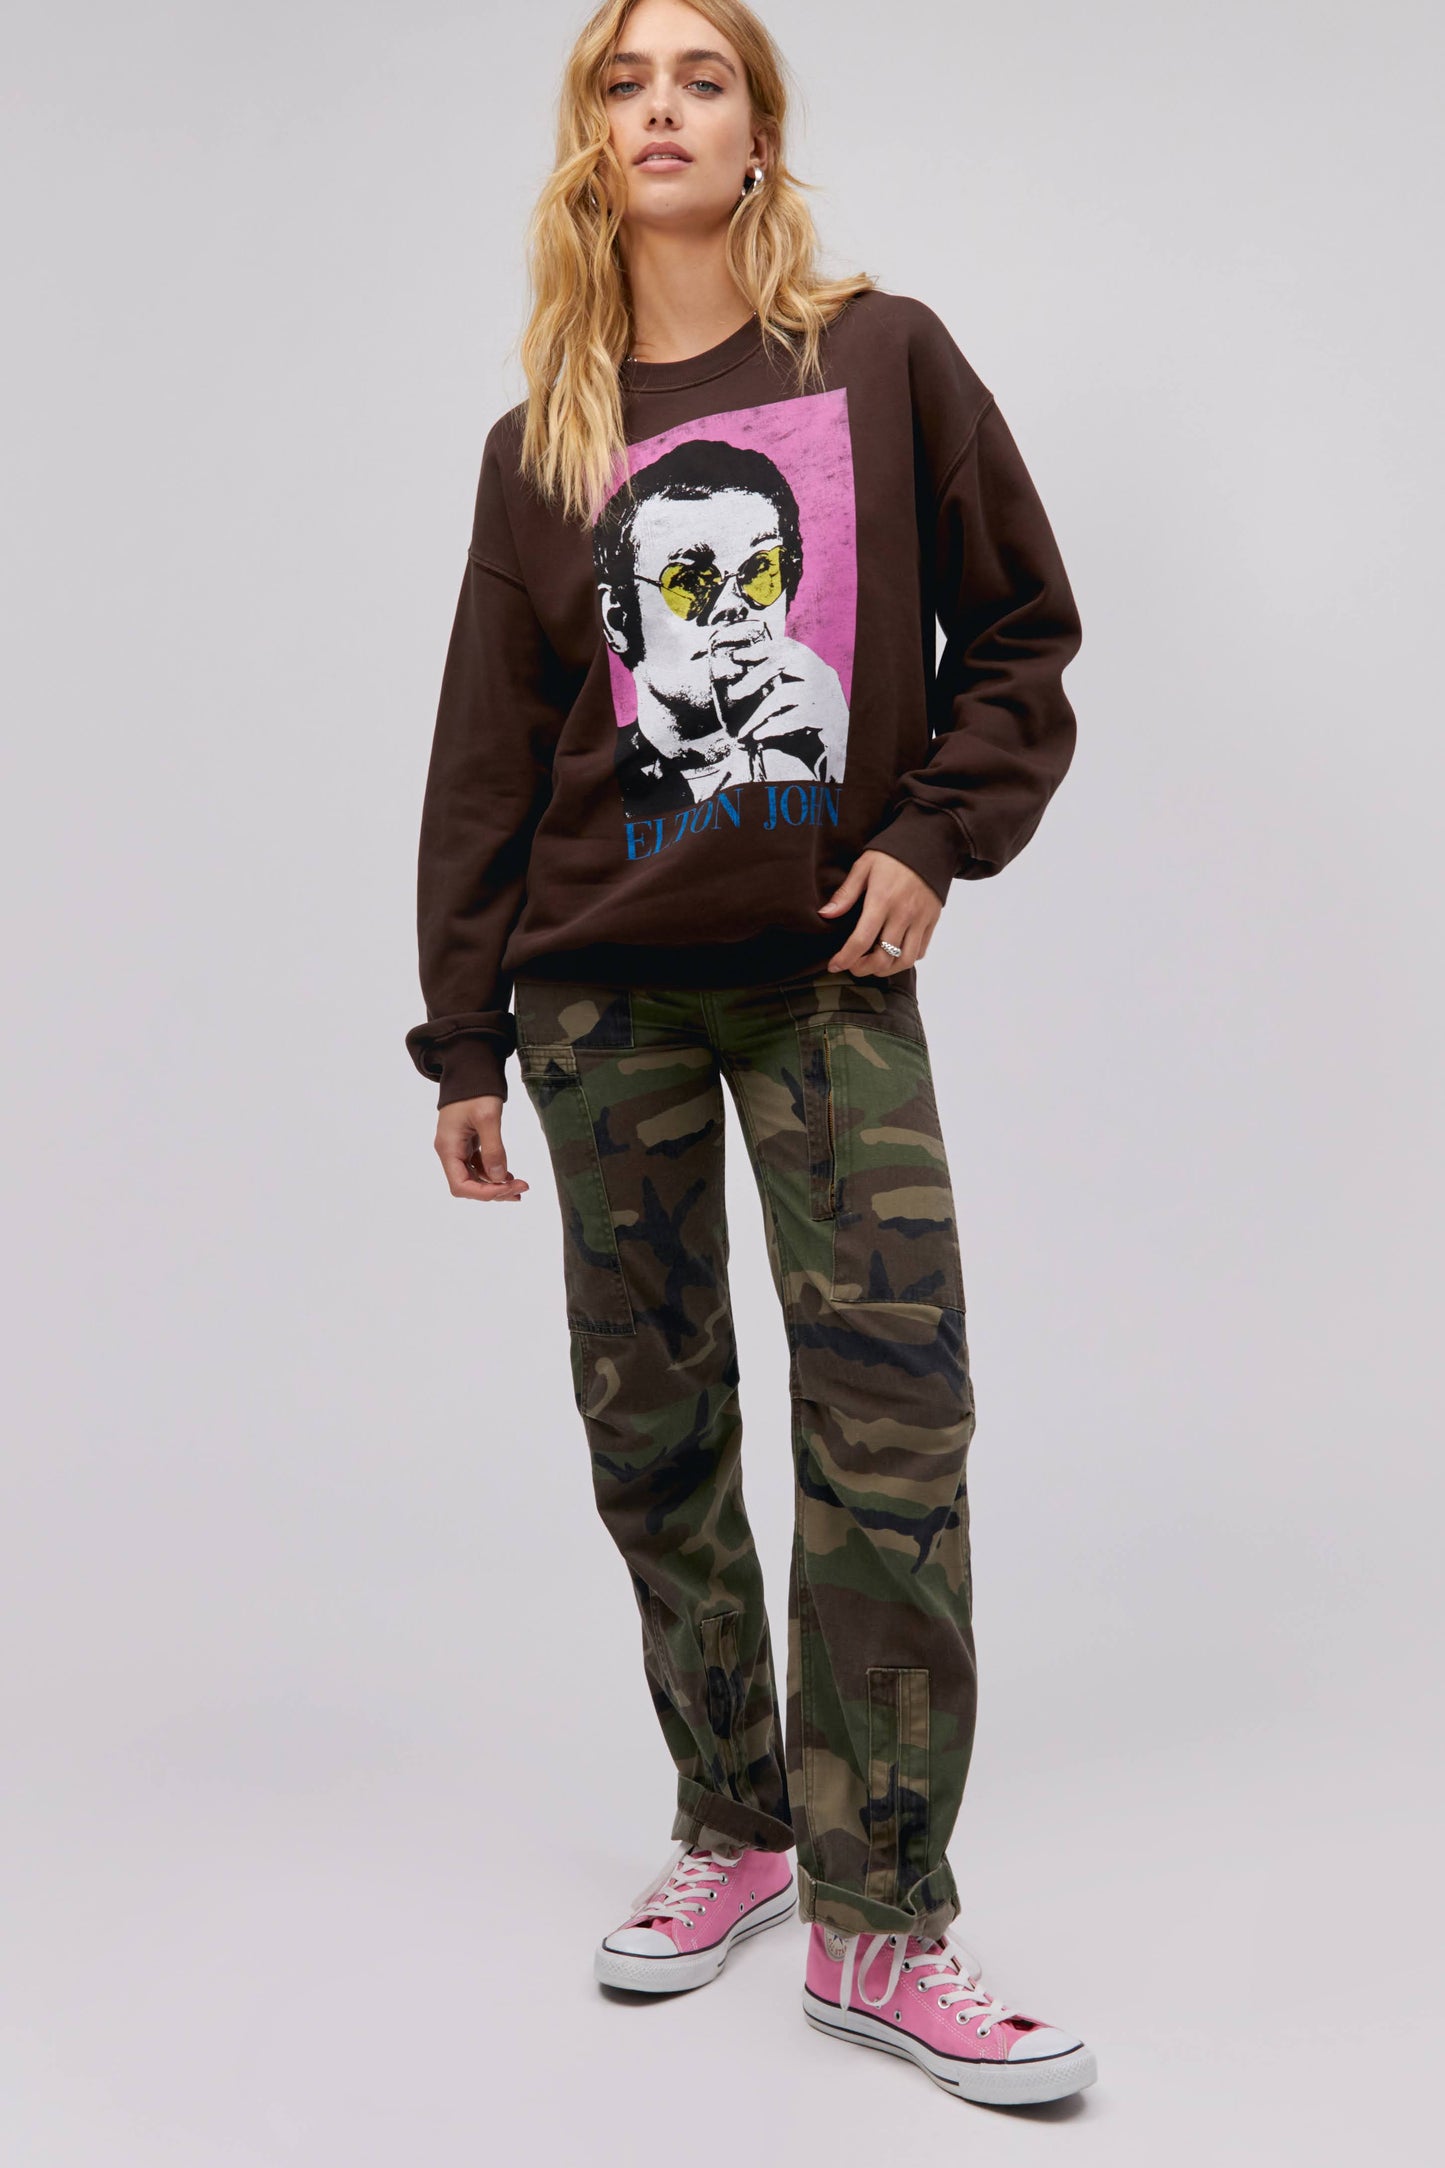 A blonde-haired model featuring a dark brown bf crew stamped with 'Elton John' and designed with an iconic portrait of the artist.